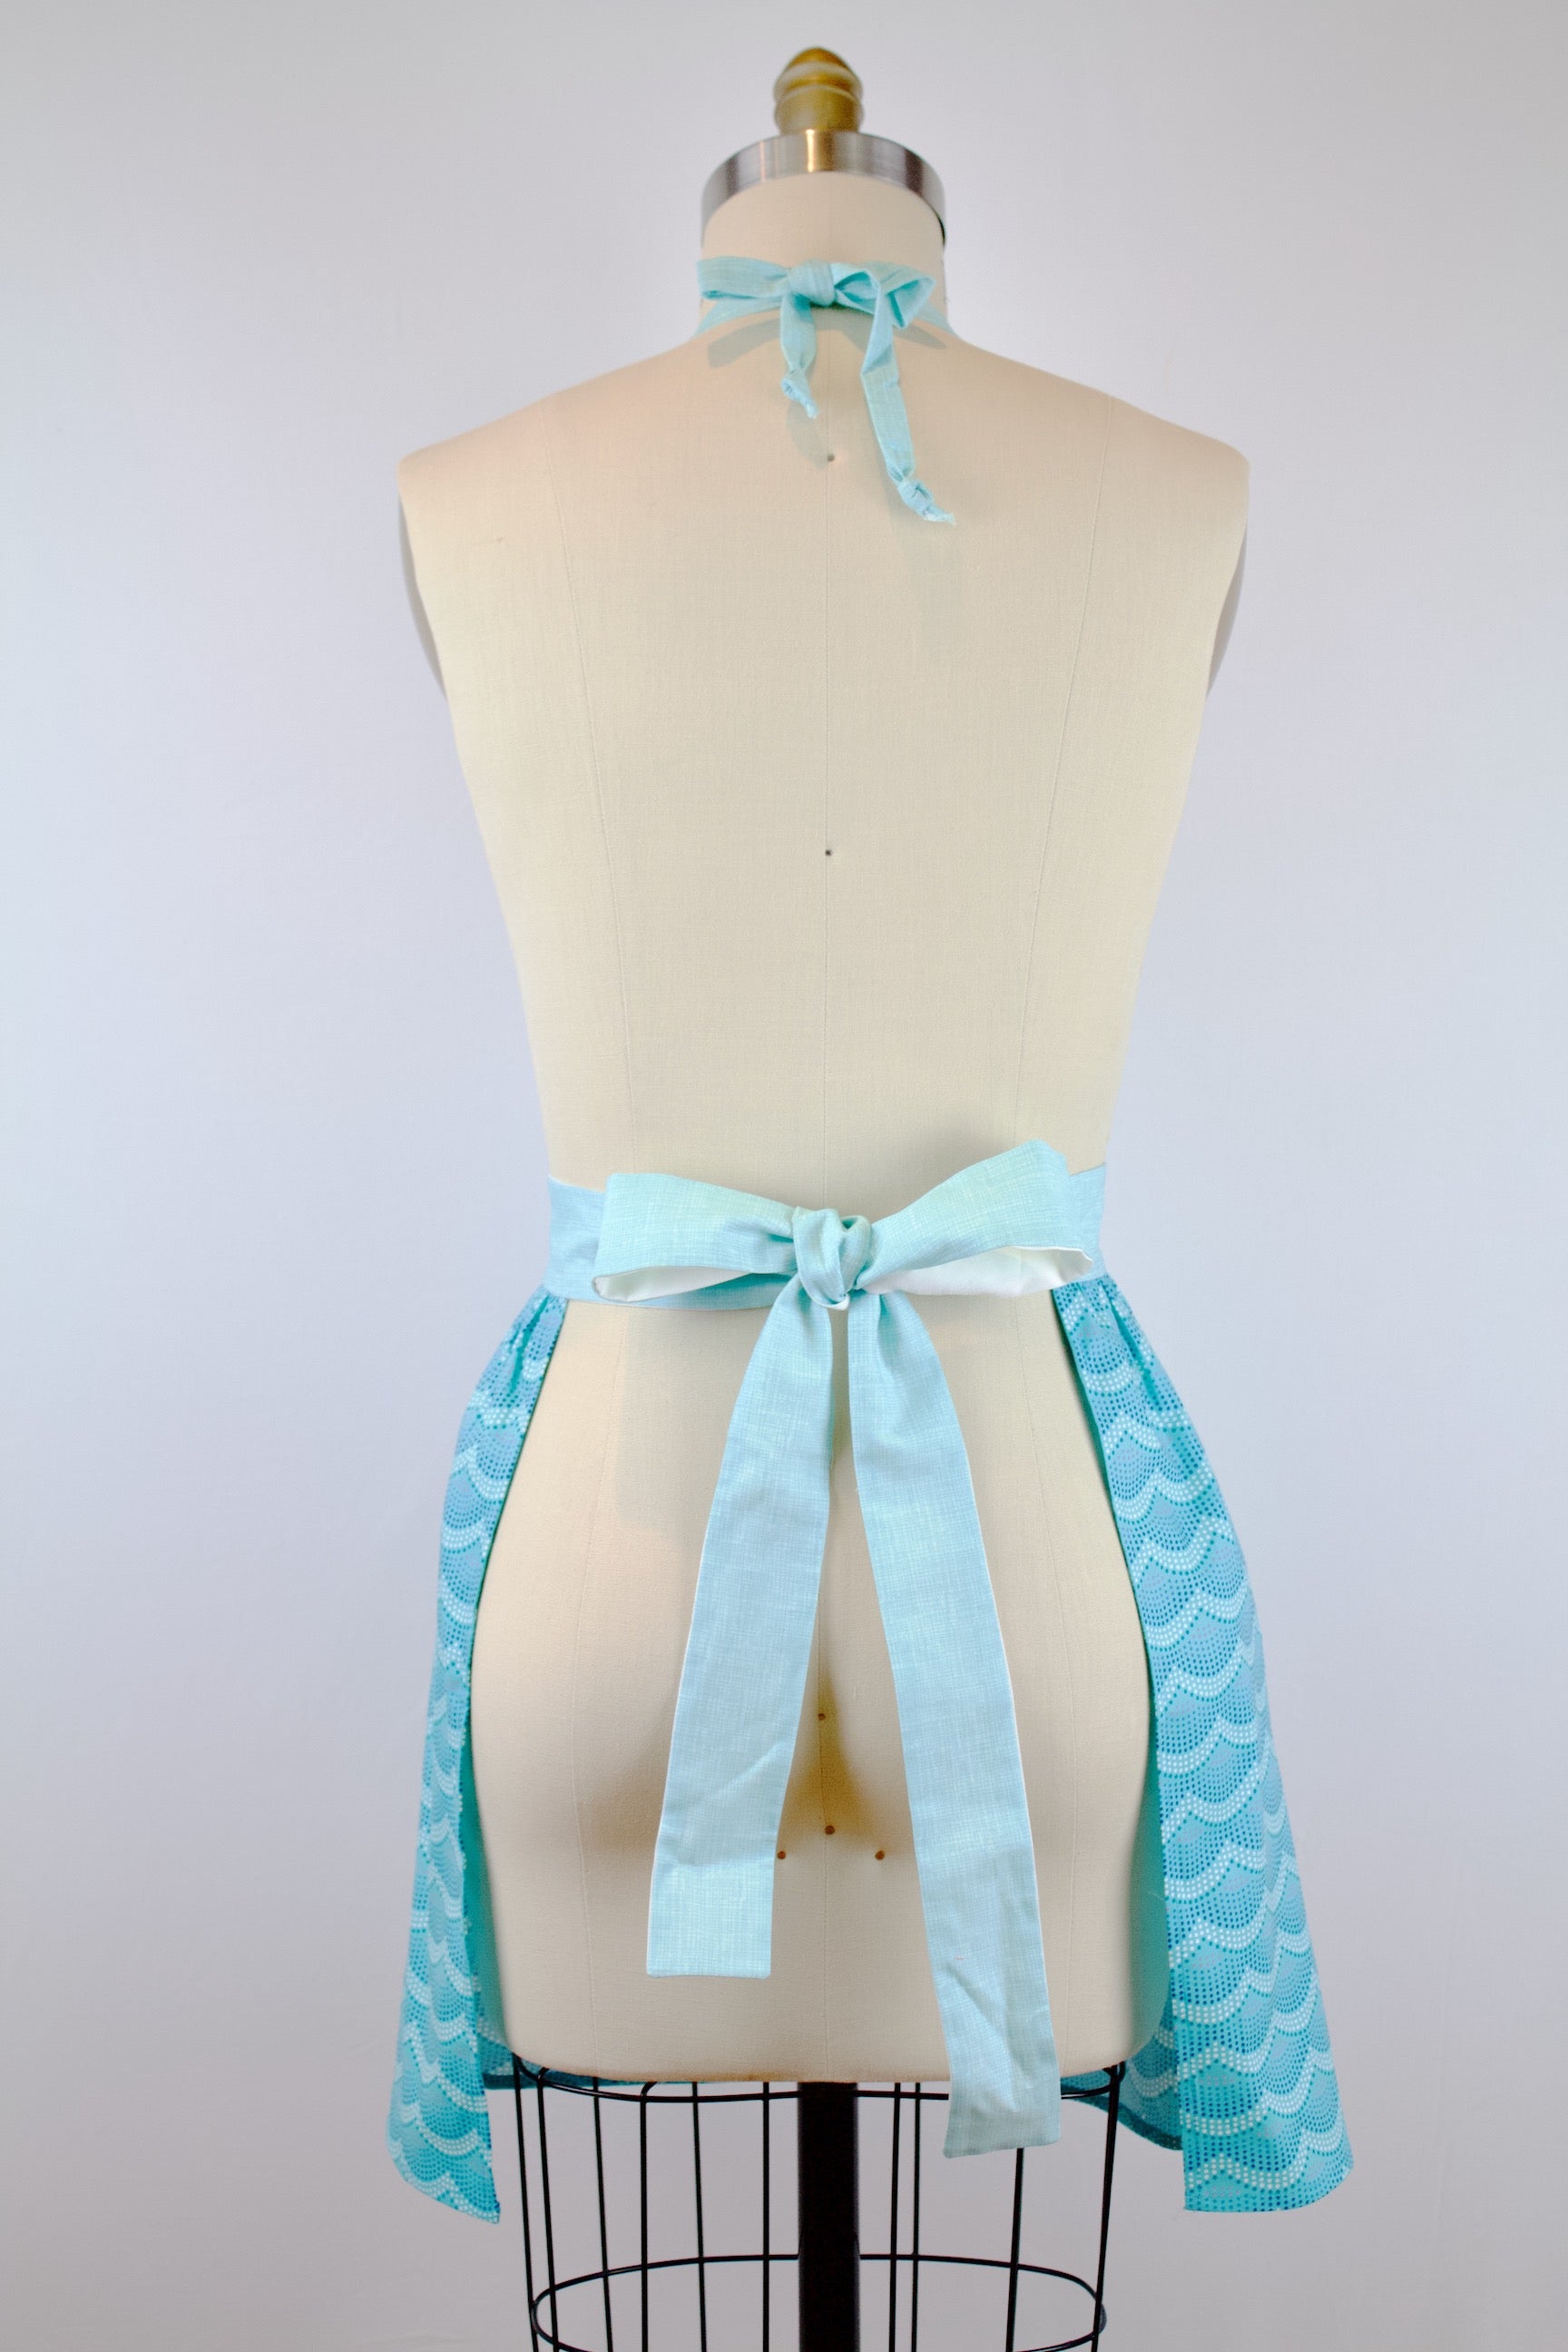 Into The Deep Vienna Style Apron-The Blue Peony-Age Group_Adult,Apron Style_Vintage Feminine,Category_Apron,Color_Blue,Color_Teal,Department_Kitchen,Material_Cotton,Theme_Animal,Theme_Water Life